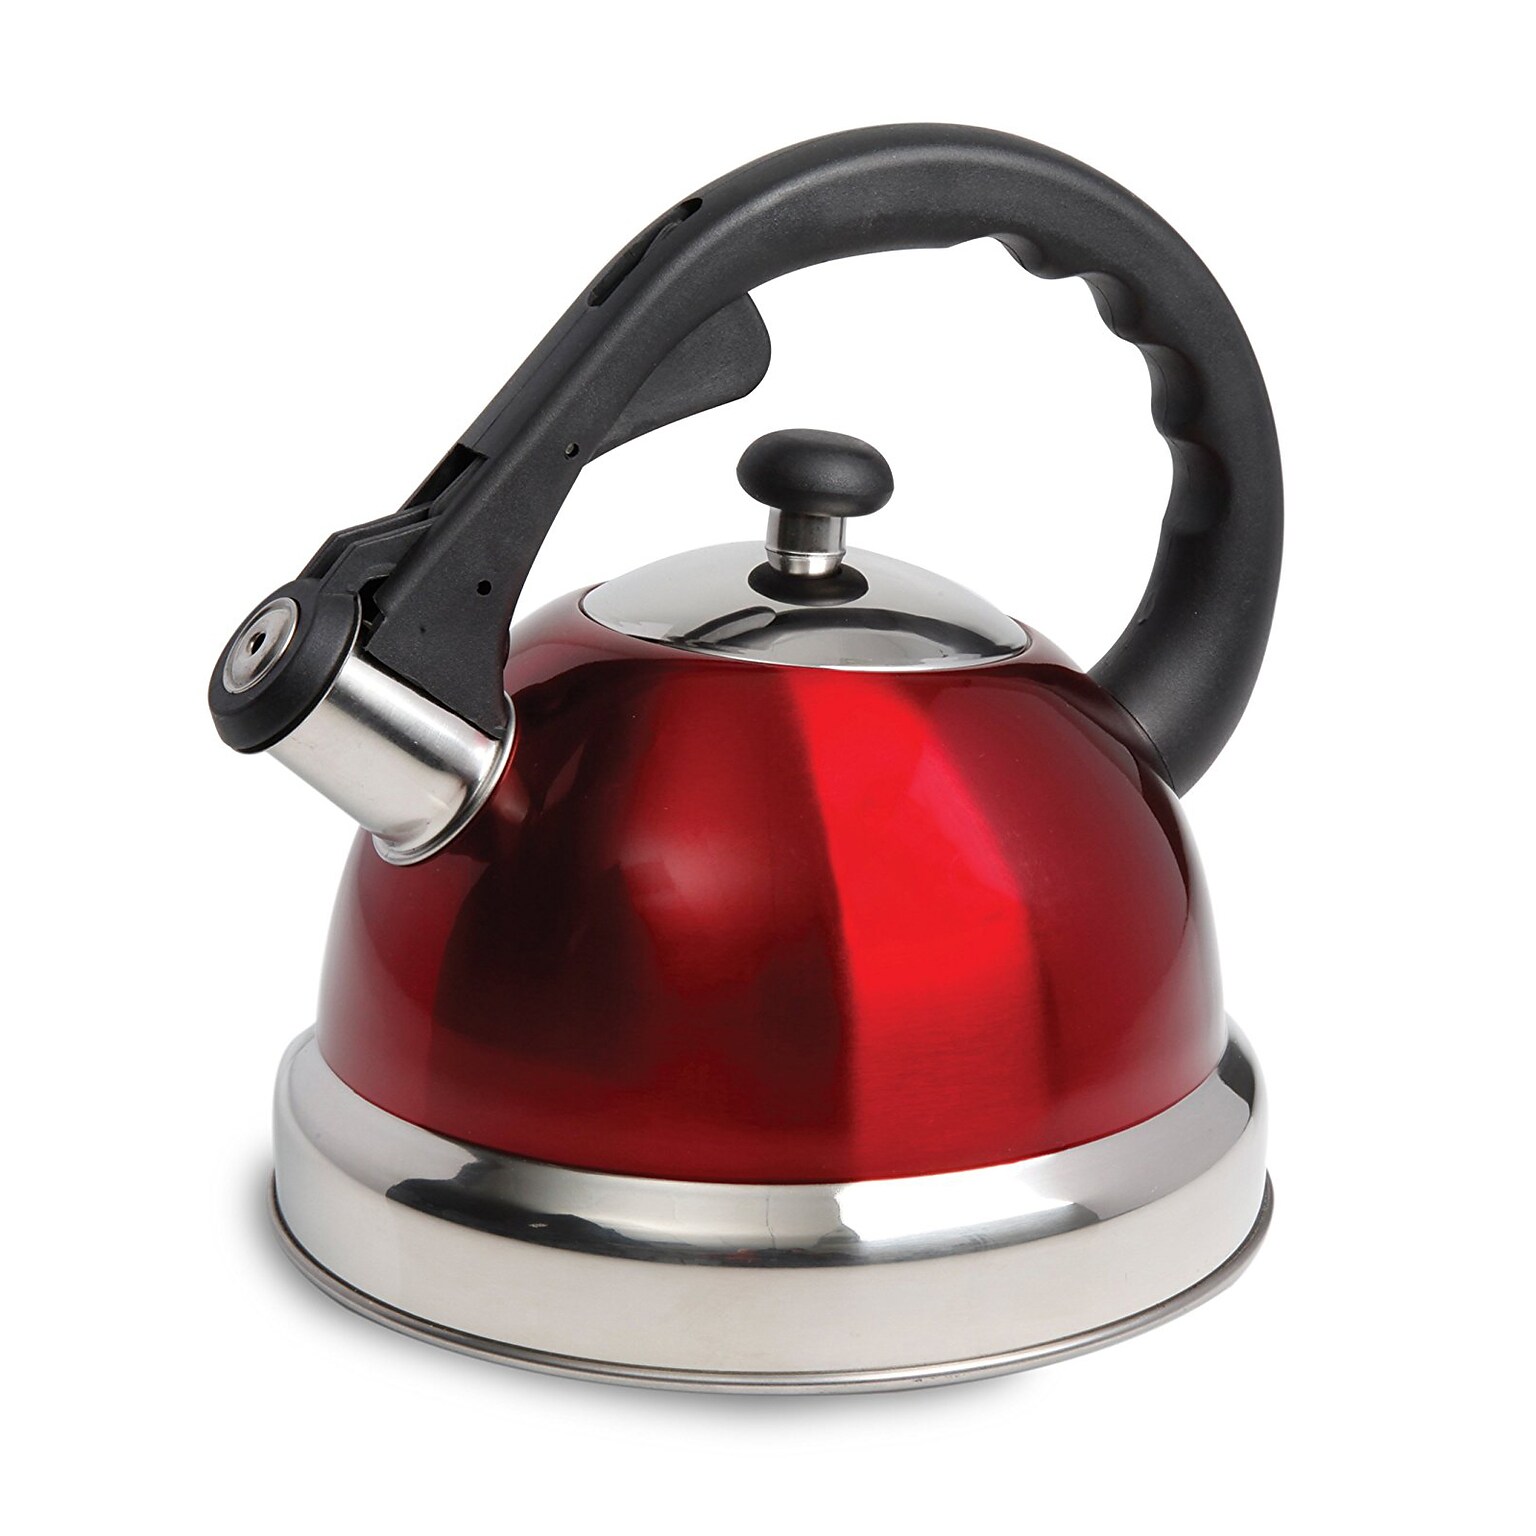 Mr. Coffee Claredale 1.7 Qt Whistling Tea Kettle, Red